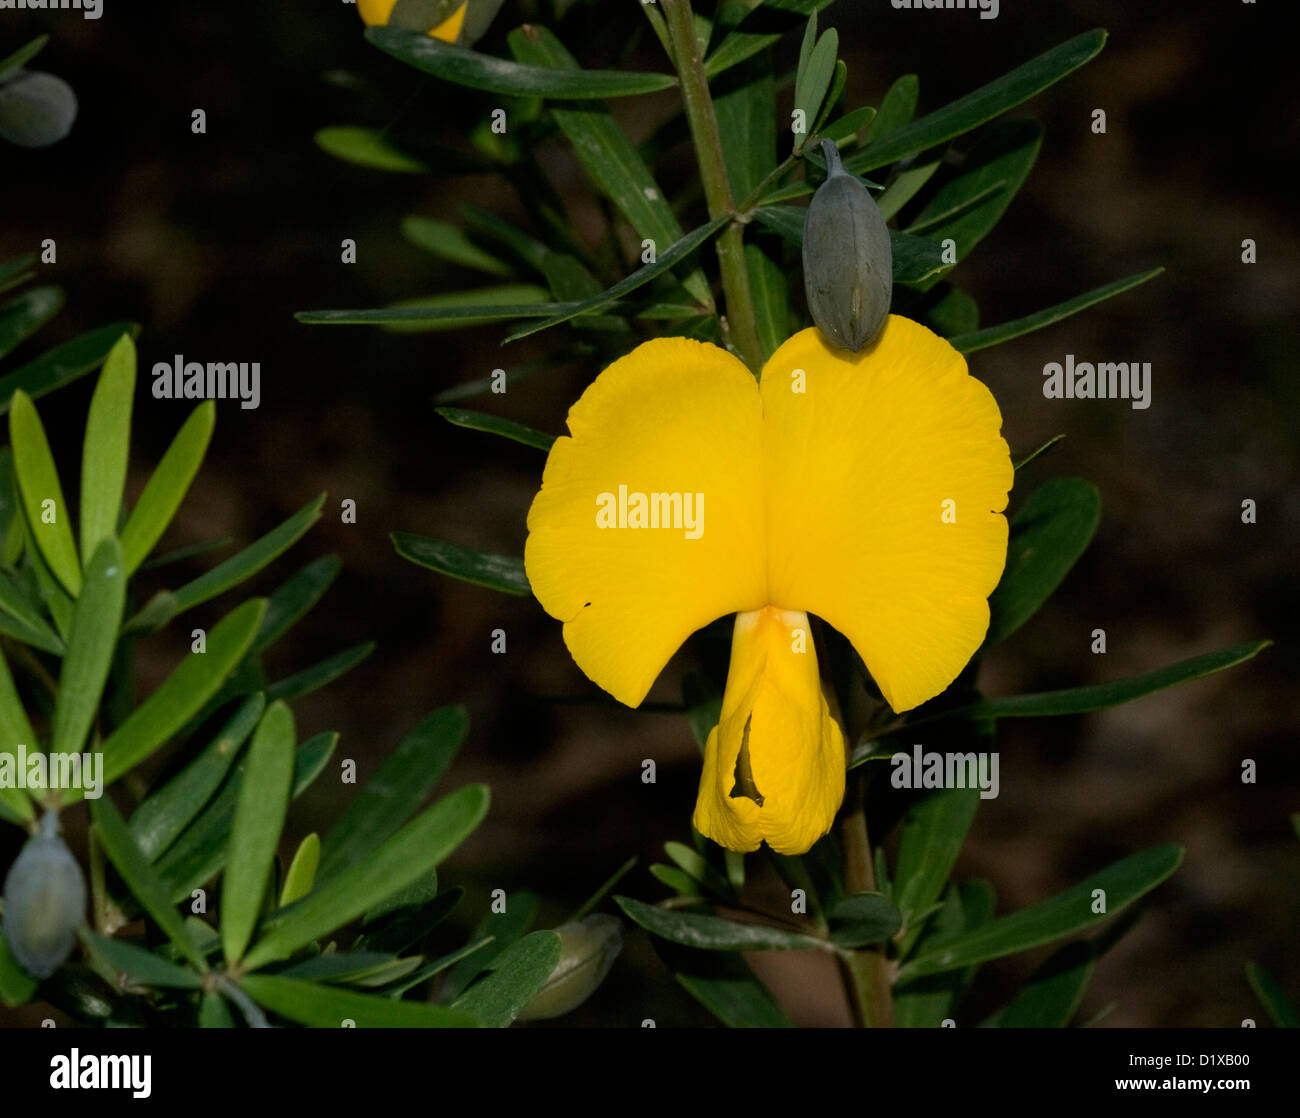 Golden yellow flower and leaves and seed pod of Gompholobium latifolium - golden glory pea - an Australian wildflower Stock Photo